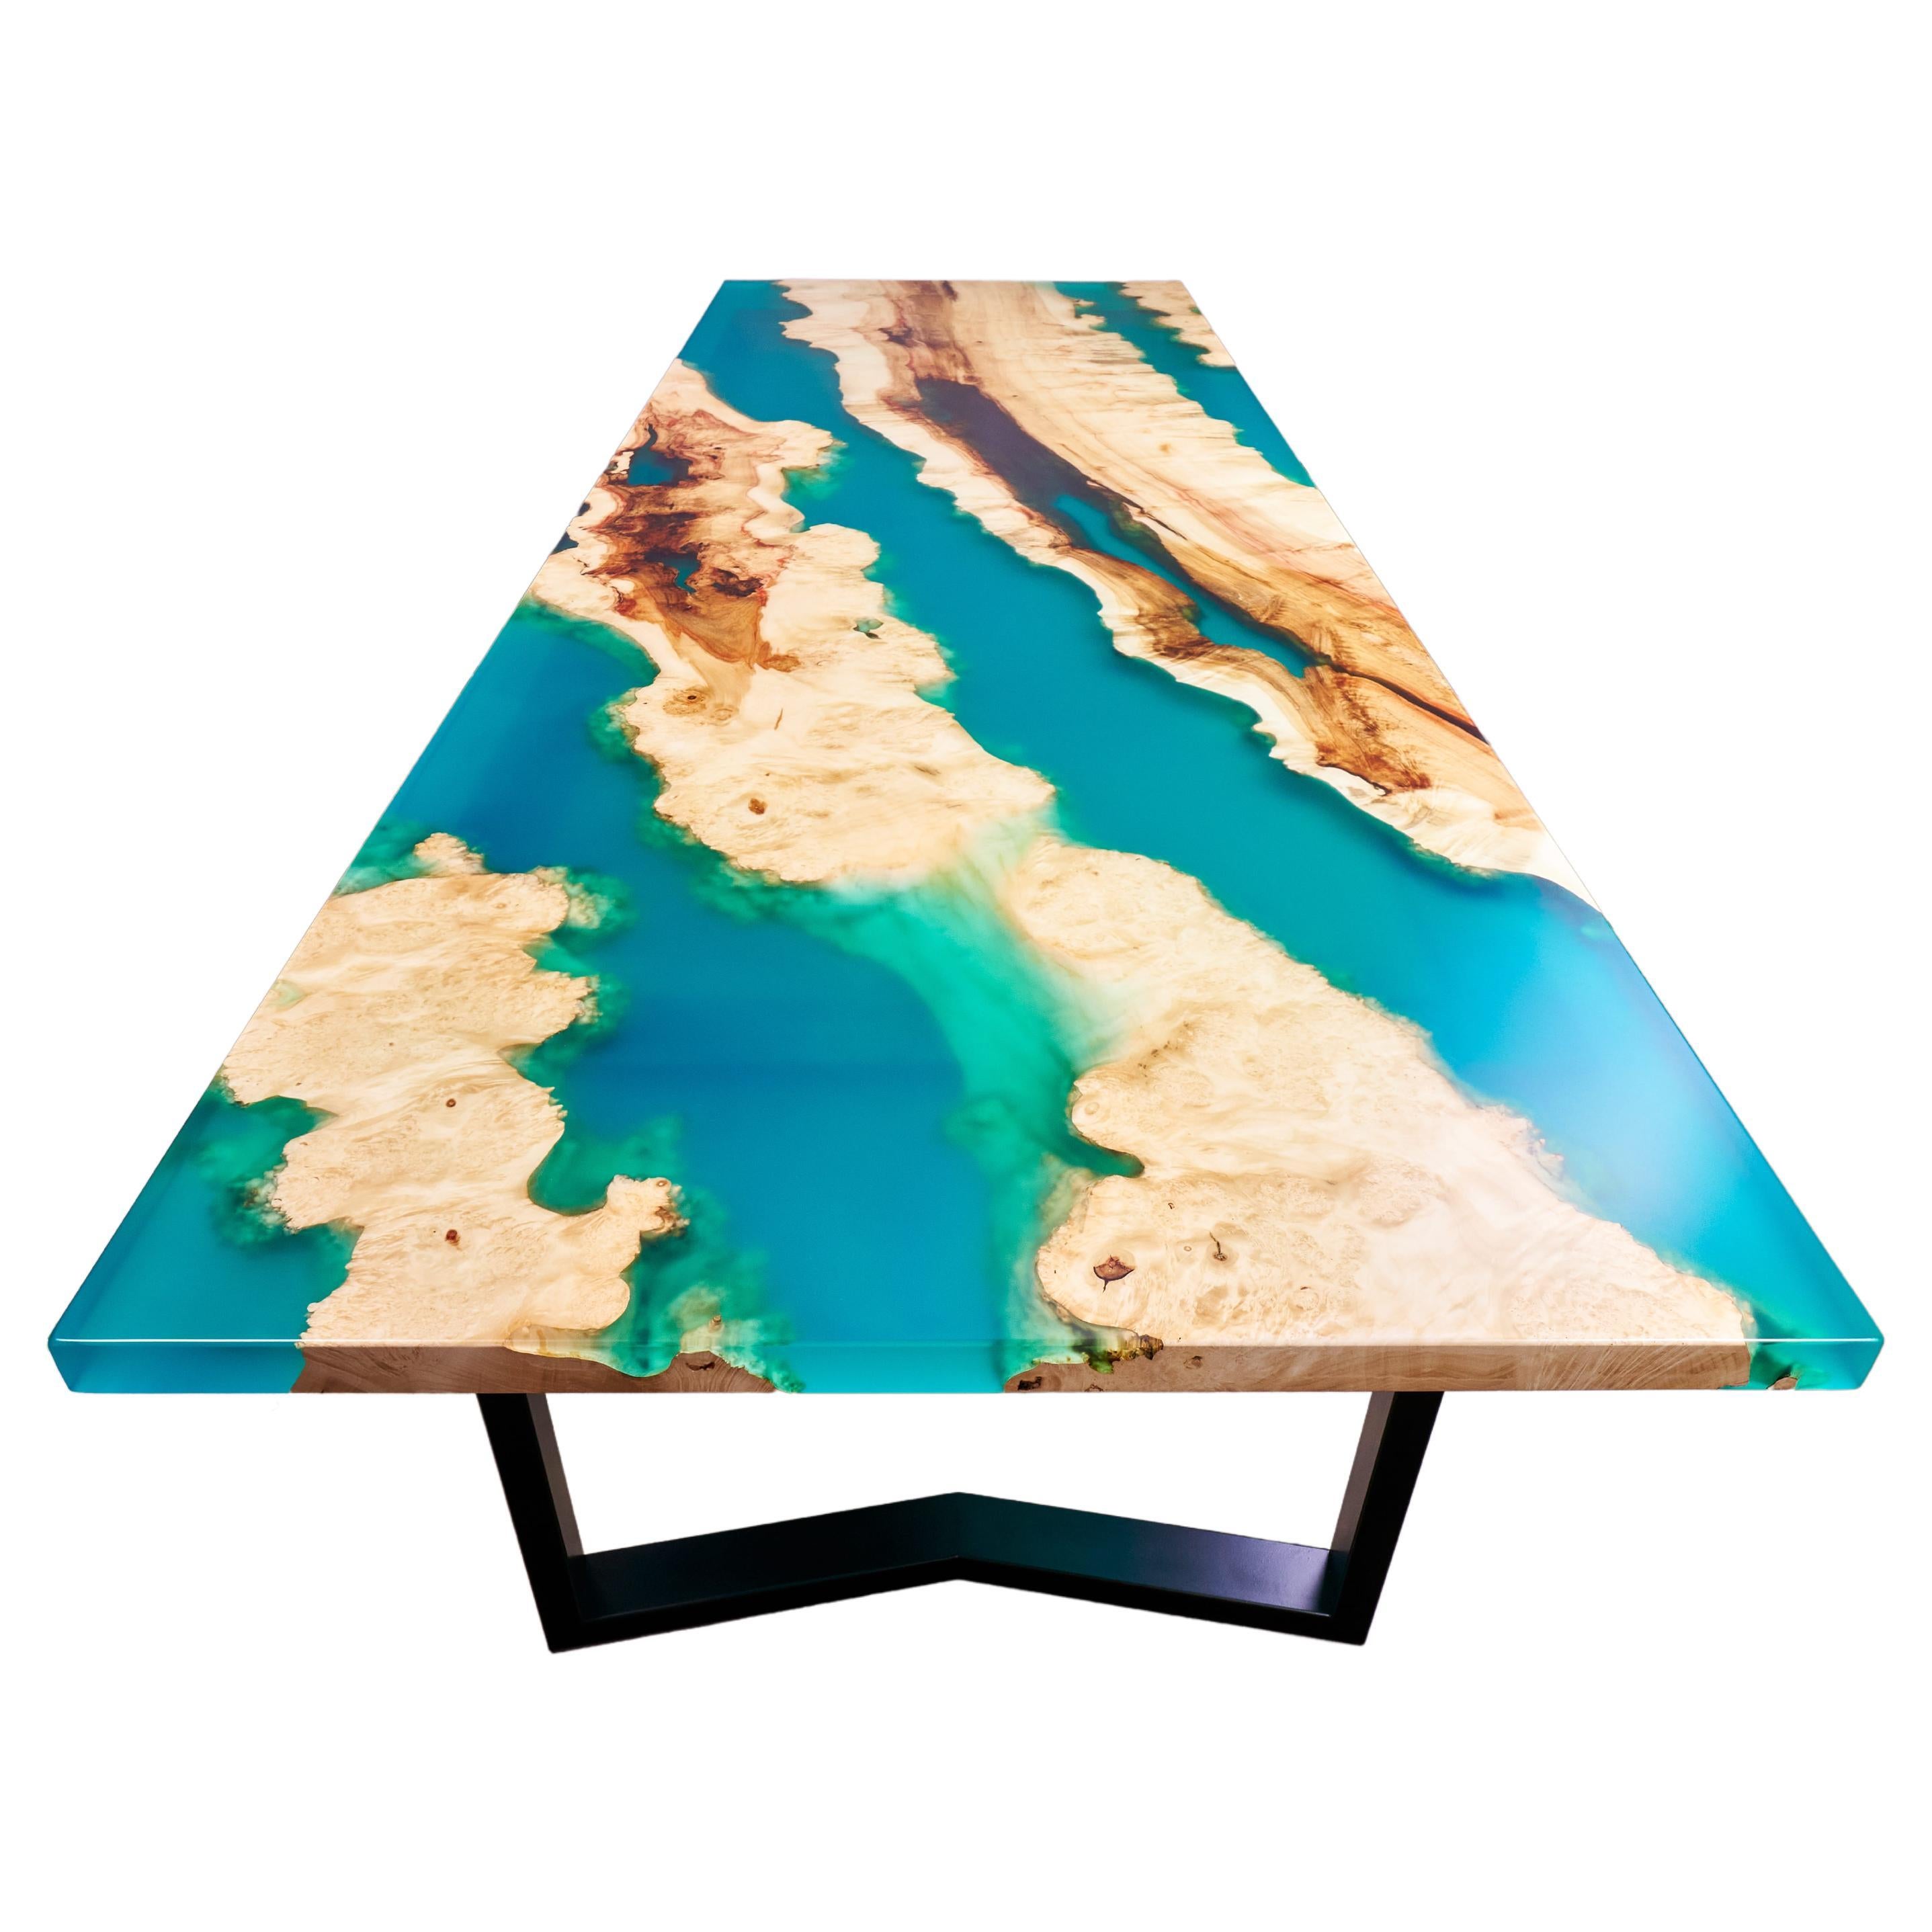 Burl Wood Dining Table Contemporary Modern Table Epoxy Resin Handmade Table For Sale